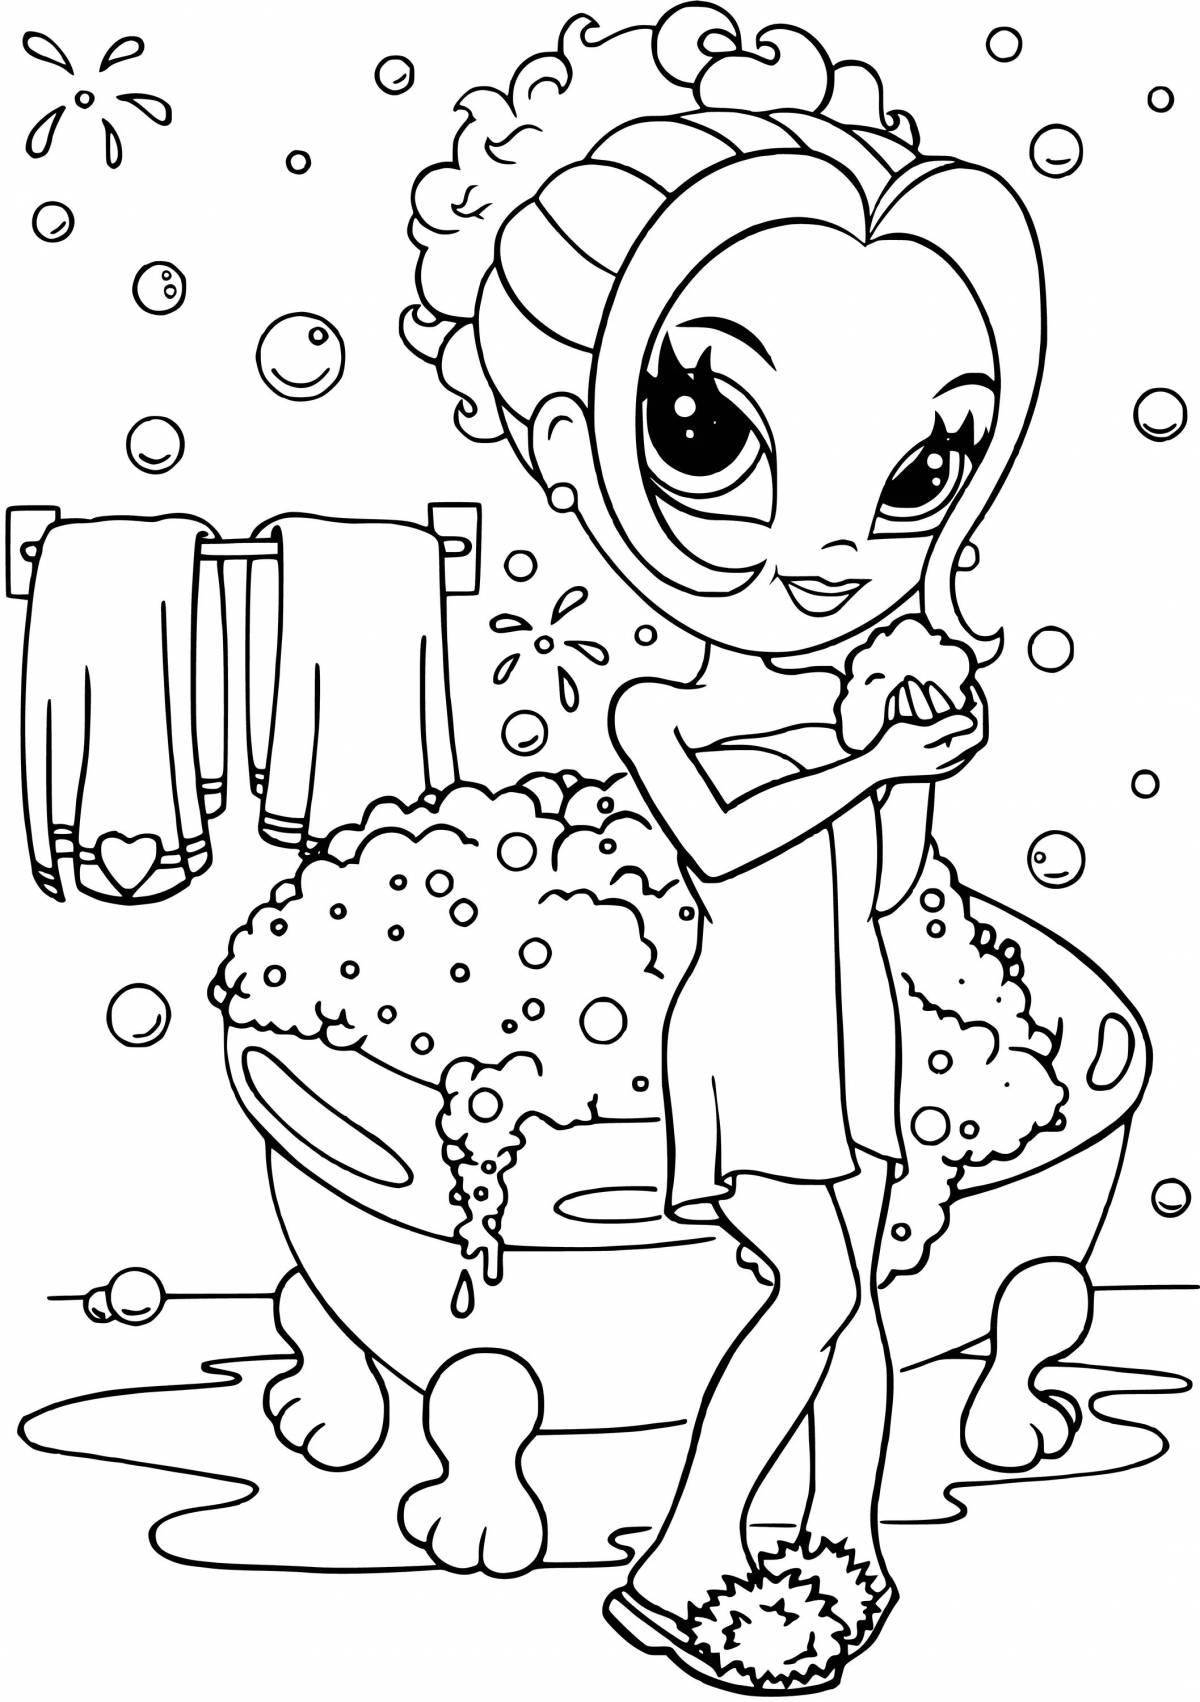 Magic coloring game for girls 9-10 years old